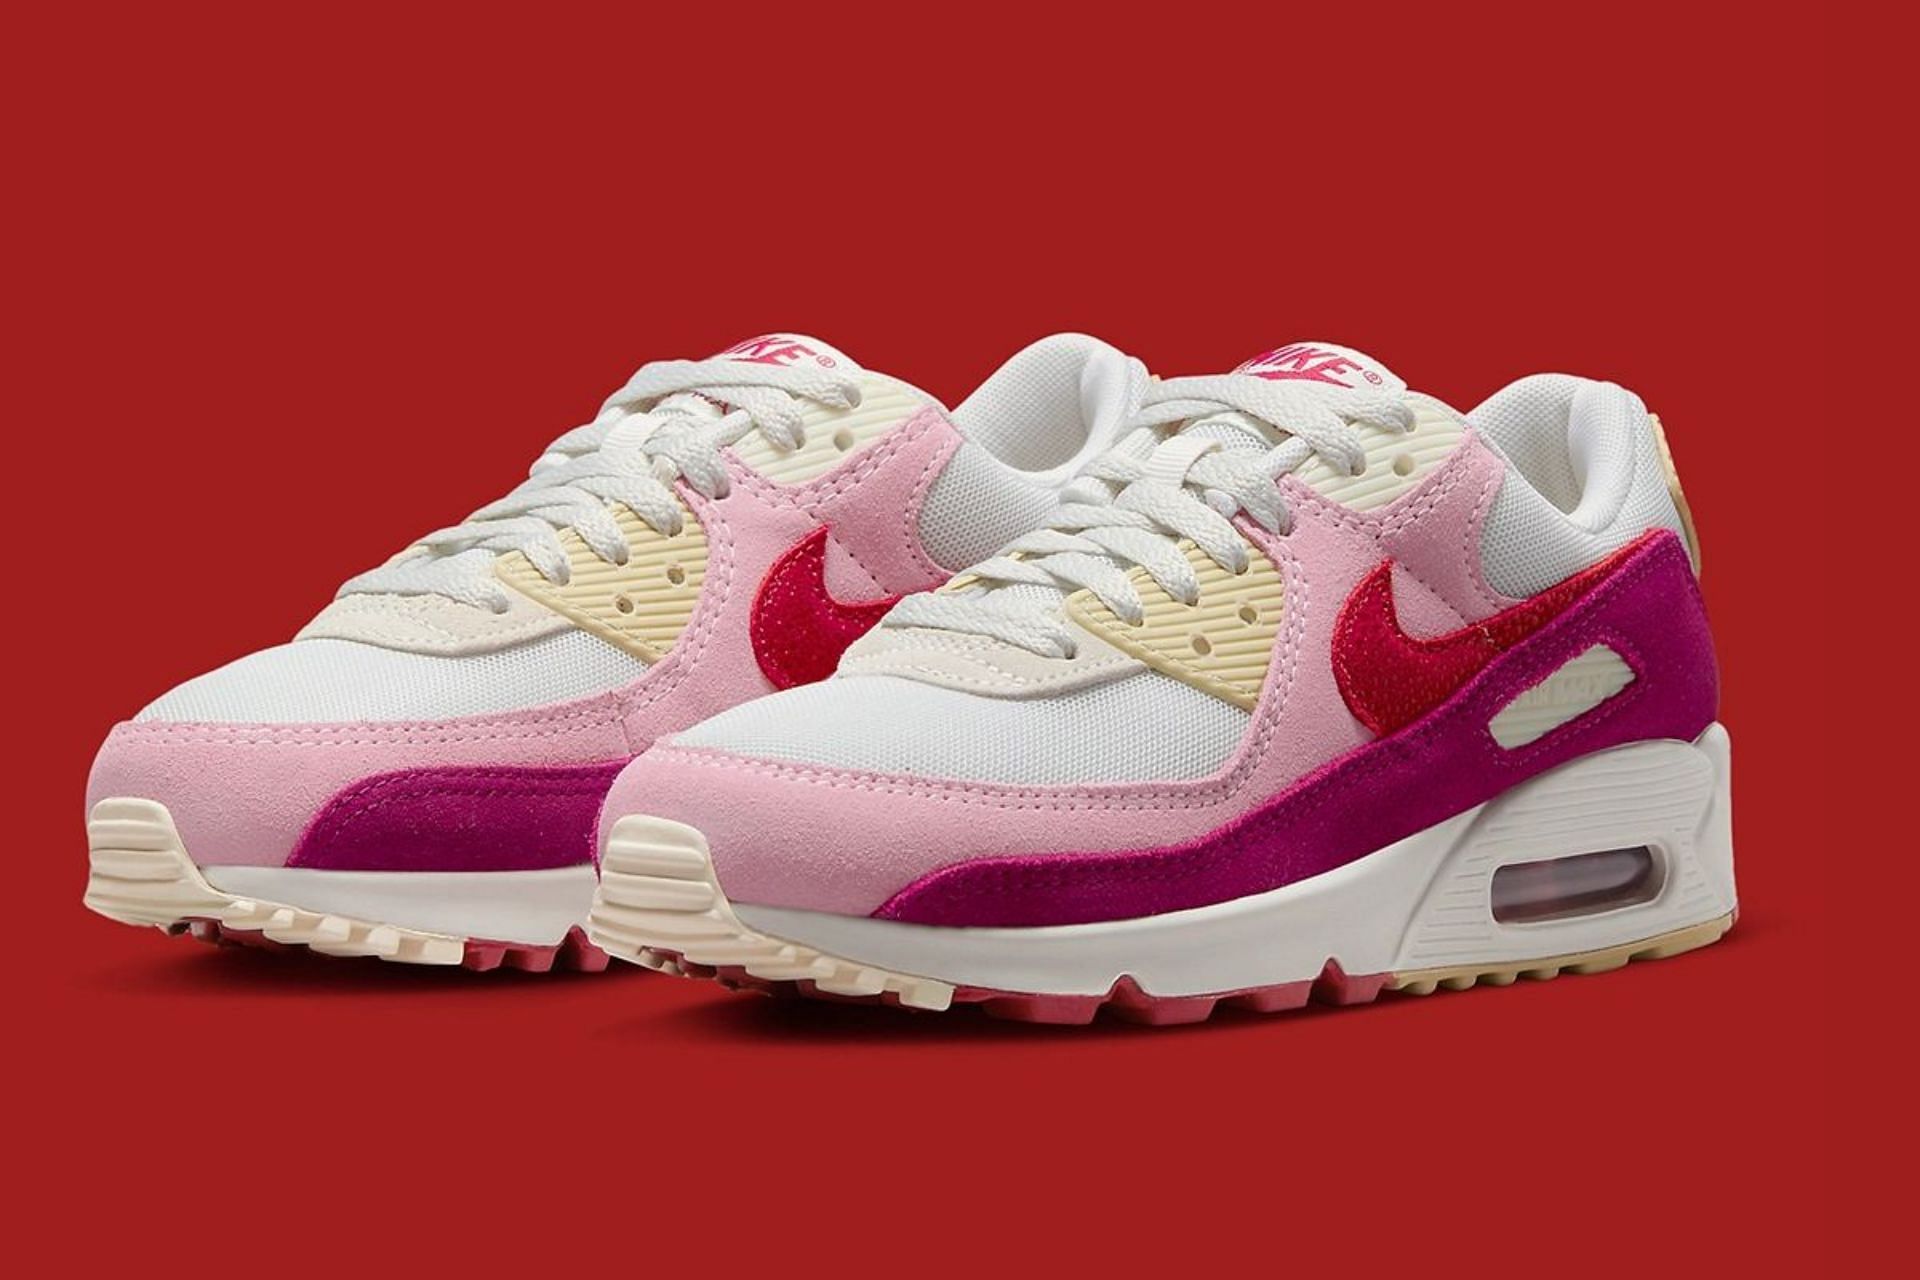 Air Max 90 Where to buy Nike Air Max 90 “Valentine’s Day” shoes? Price